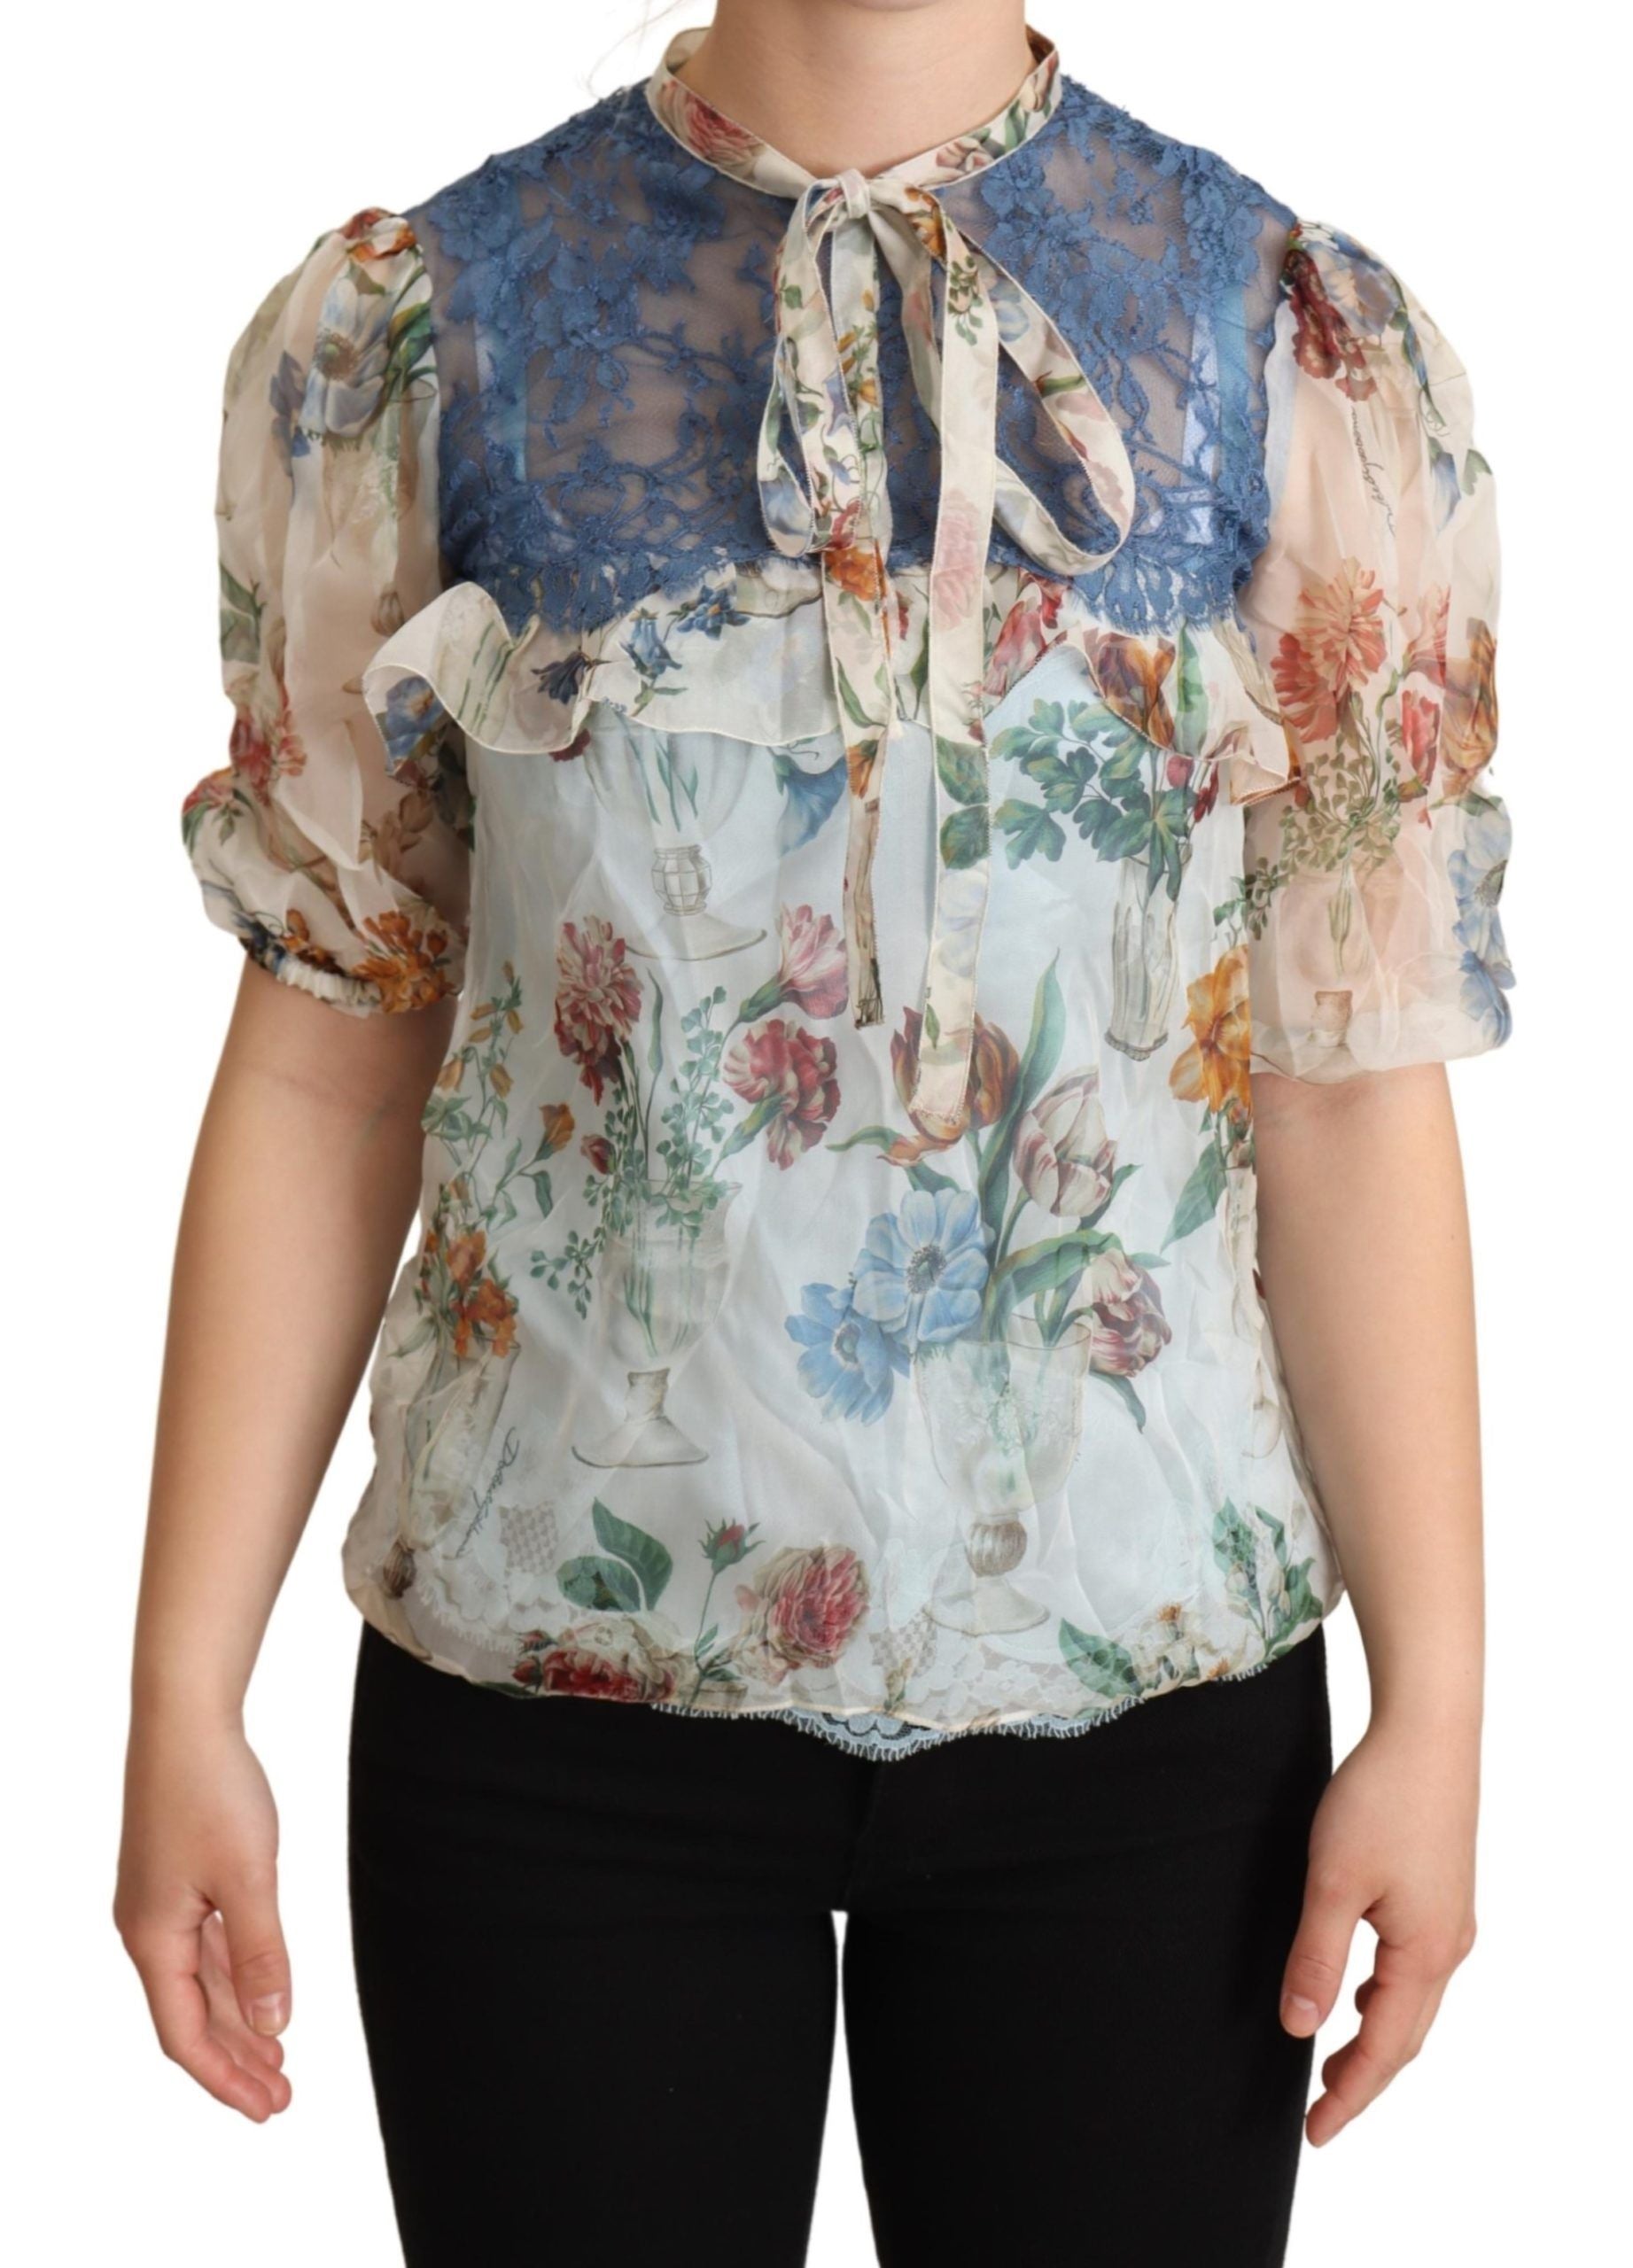 Chic Floral Silk Blouse with Ascot Collar